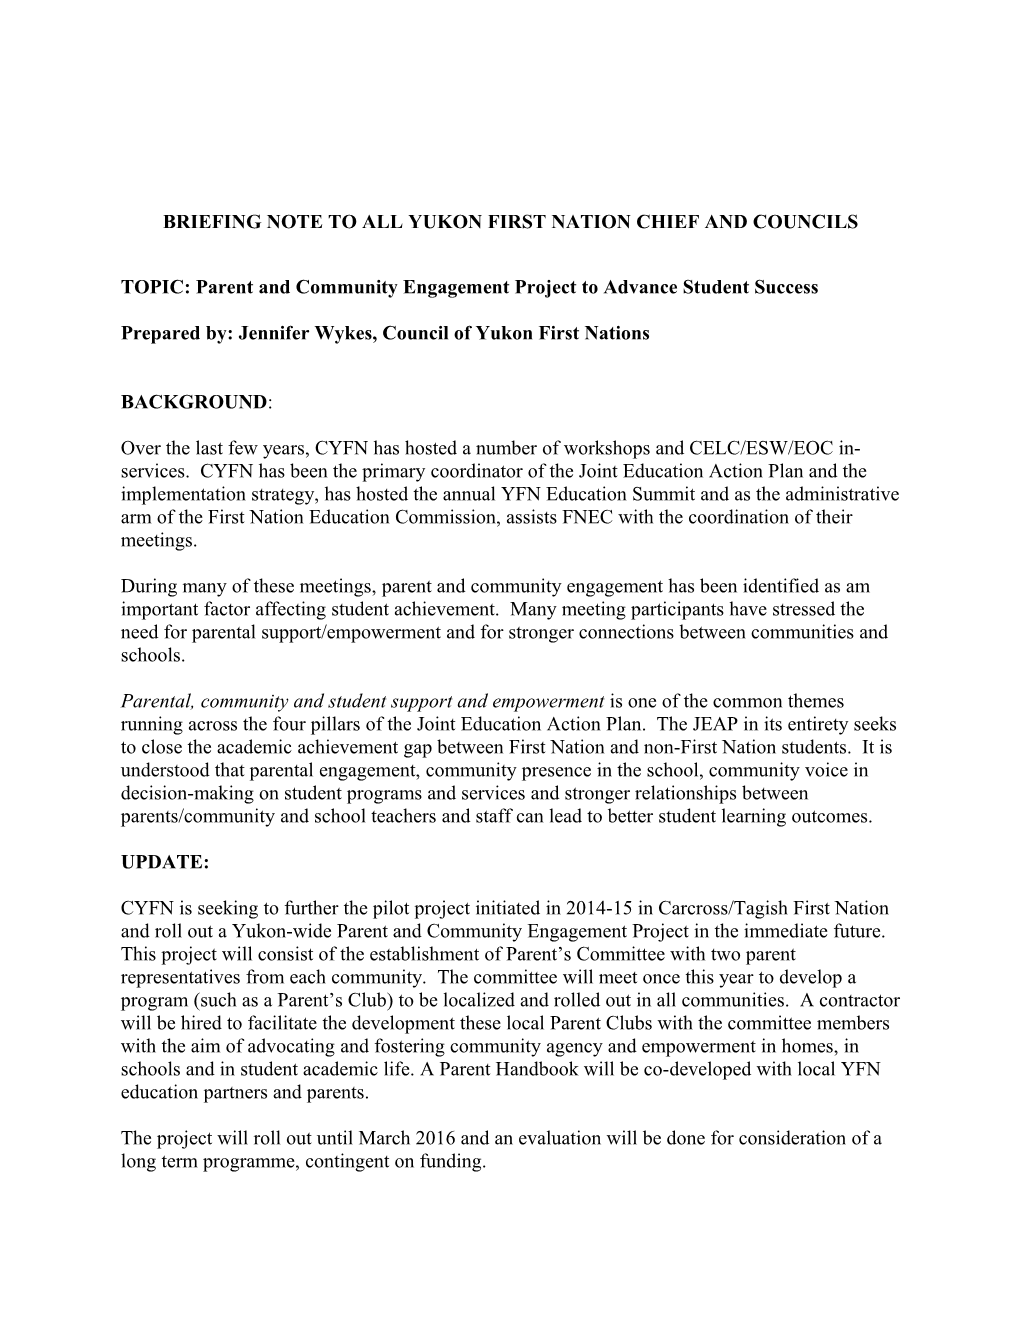 Briefing Note to All Yukon First Nation Chief and Councils